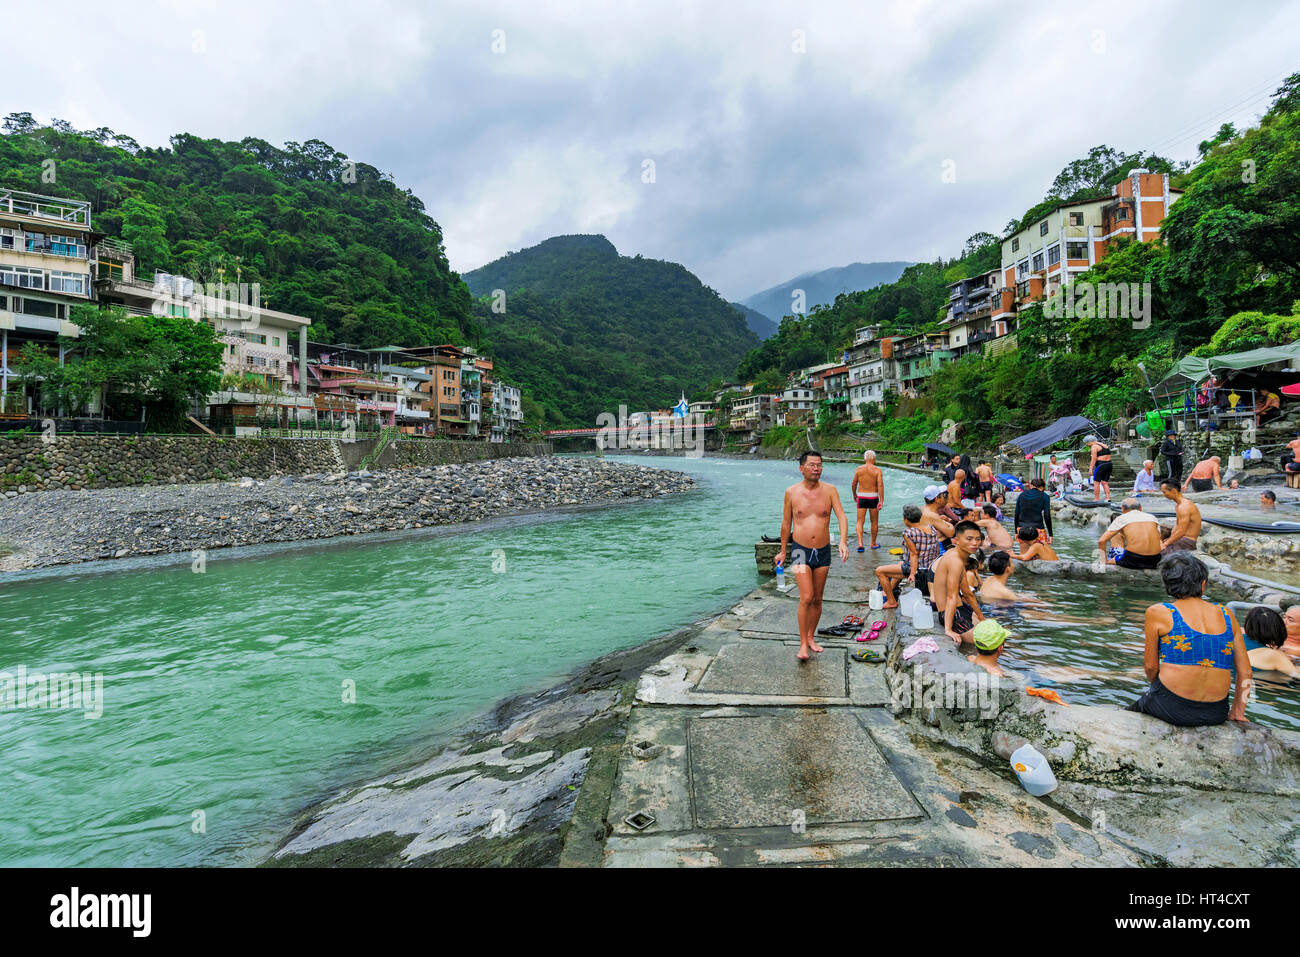 TAIPEI, TAIWAN - NOVEMBER 29: This is Wulai hot spring village in Taipei where local people and tourists come to relax in public baths on November 29, Stock Photo